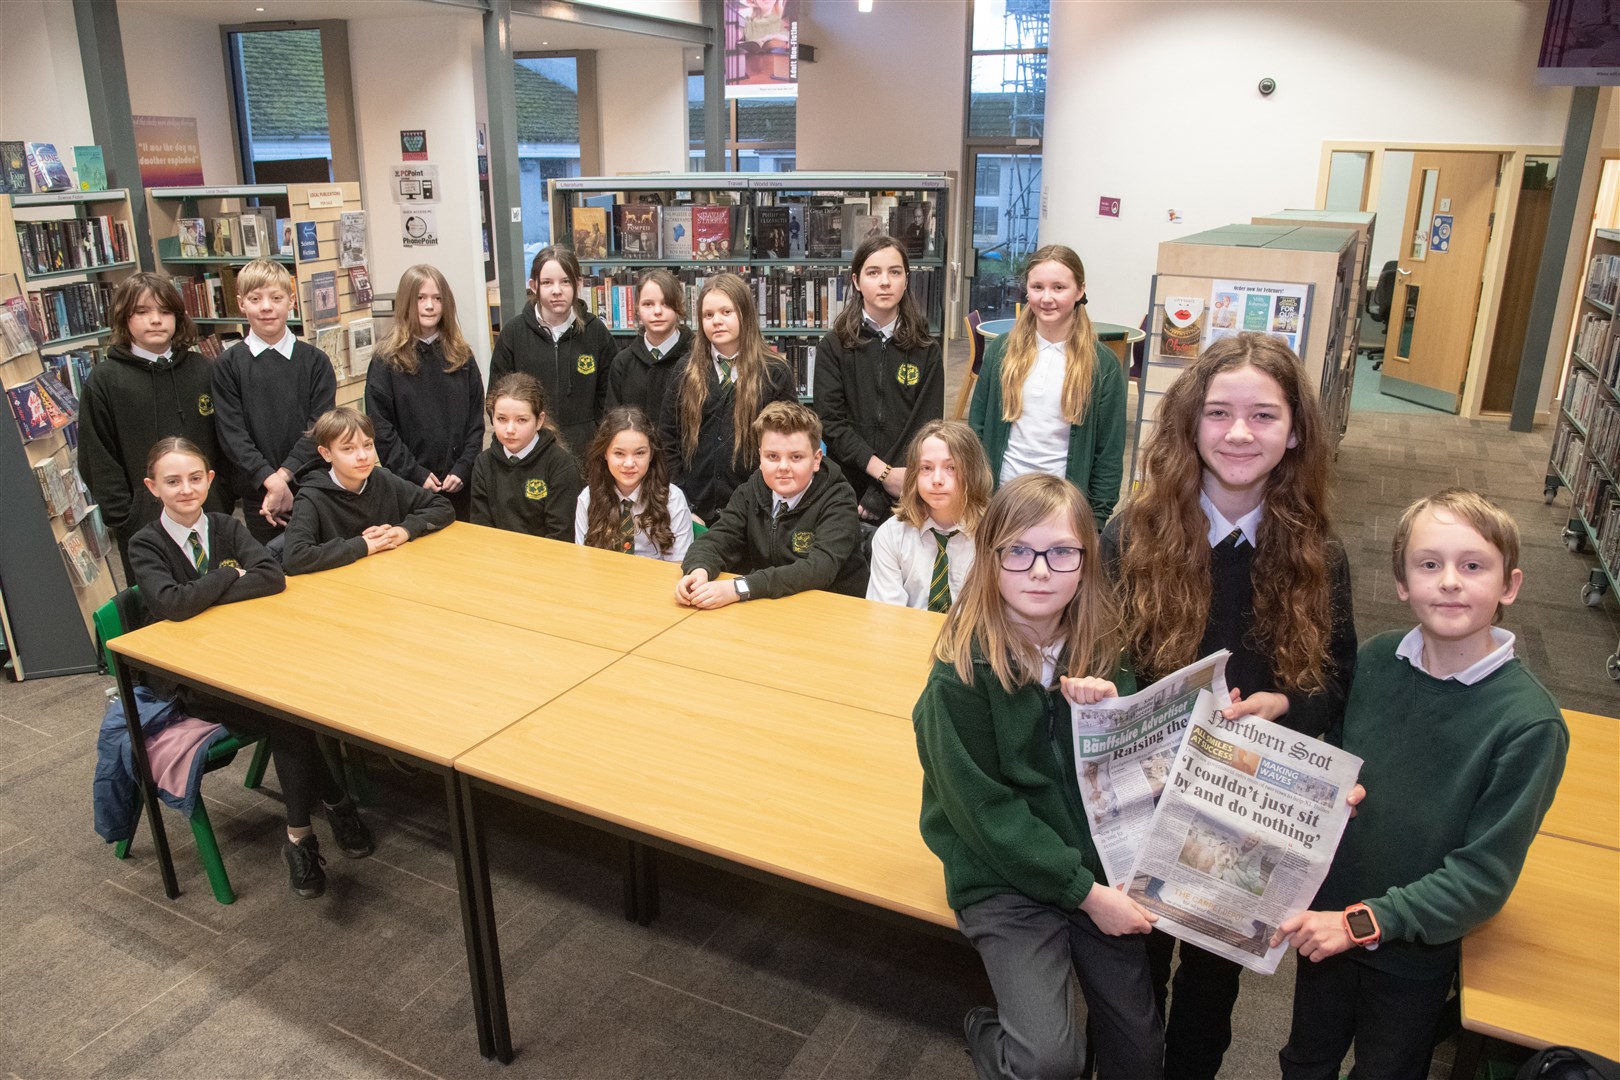 Meet the press gang at Milne's Primary and Milne's High. Picture: Daniel Forsyth